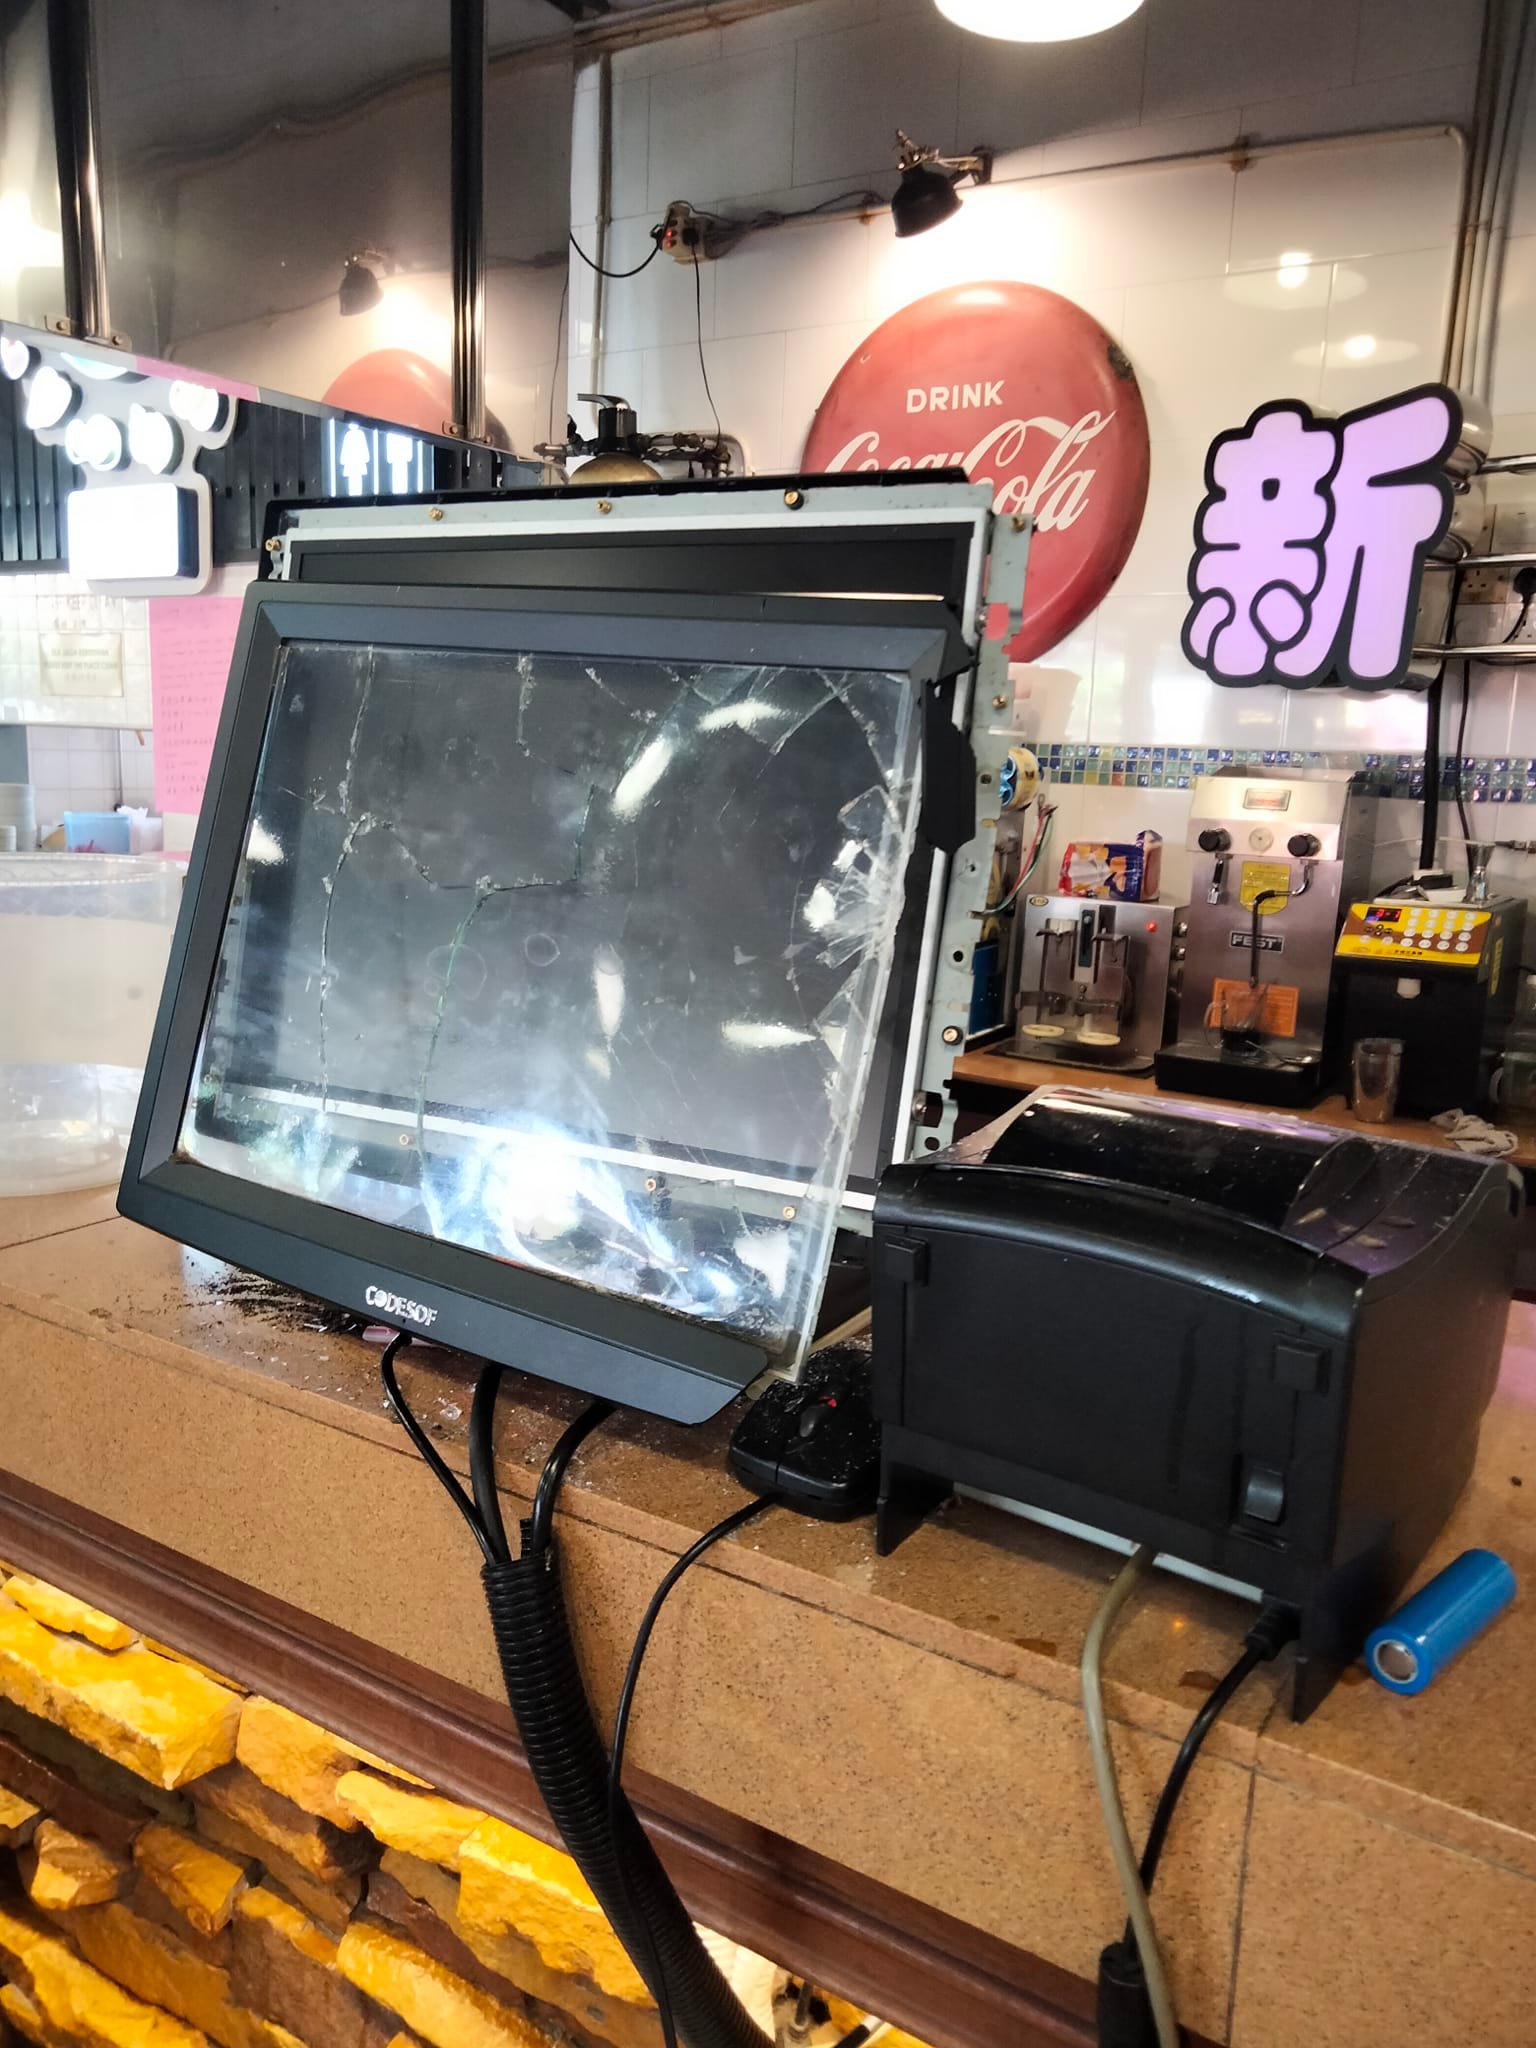 Items damaged by the man wielding a stick in the kopitiam include a temperature scanner, a cash register machine and a glass shelf.